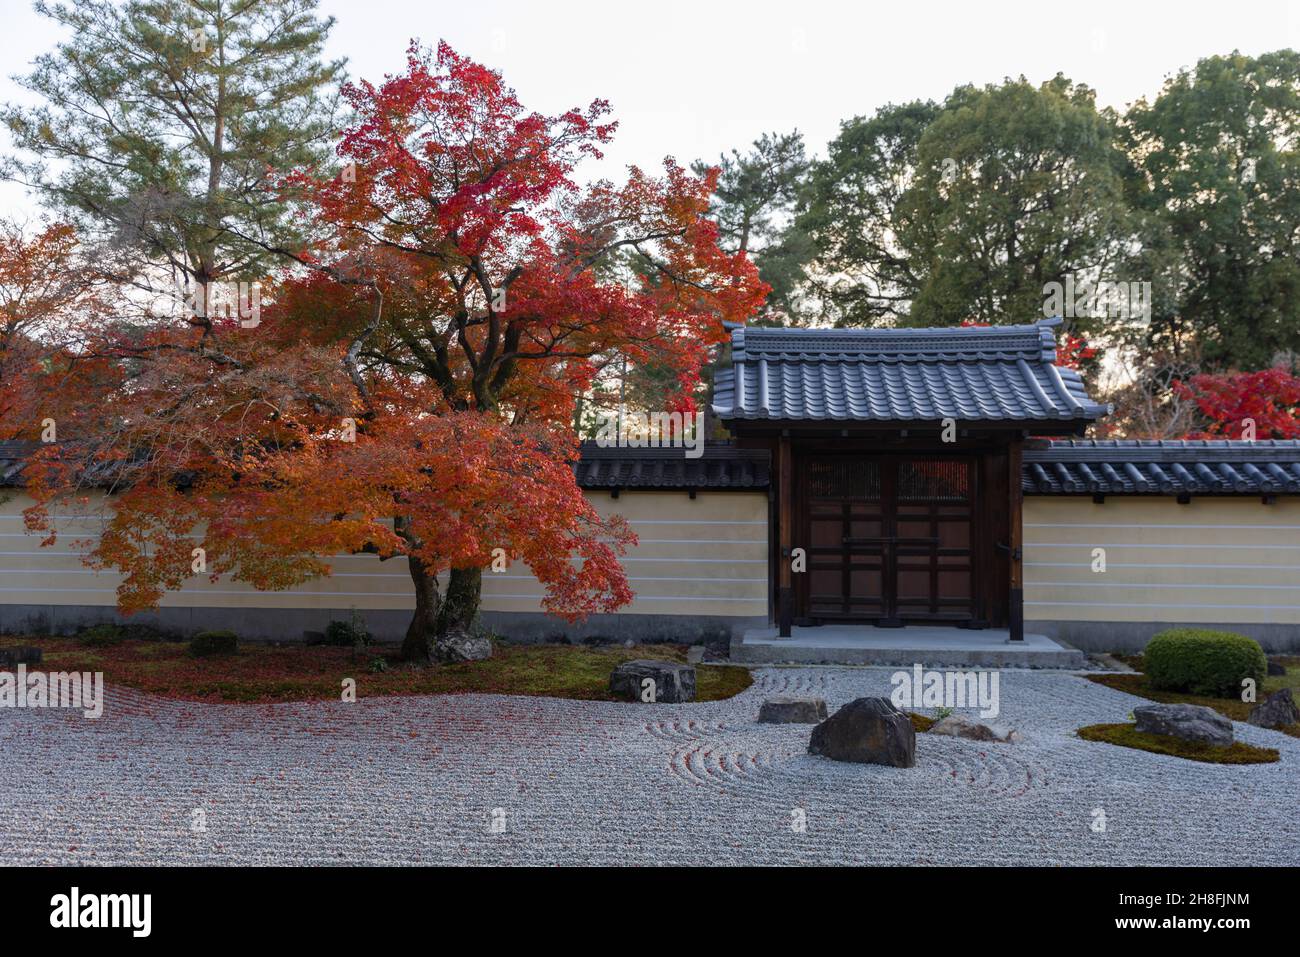 Kyoto, Japan. 26th Nov, 2021. The Zen garden with Momiji tree (Japanese Maple) is seen inside the Toji-in Temple.Toji-in was established in 1341 on the southern slope of Mount Kinugasa by the shogun Ashikaga Takauji. Fifteen shoguns came from the Ashikaga clan making the Toji-in temple rich in historical artifacts and artworks. Credit: SOPA Images Limited/Alamy Live News Stock Photo